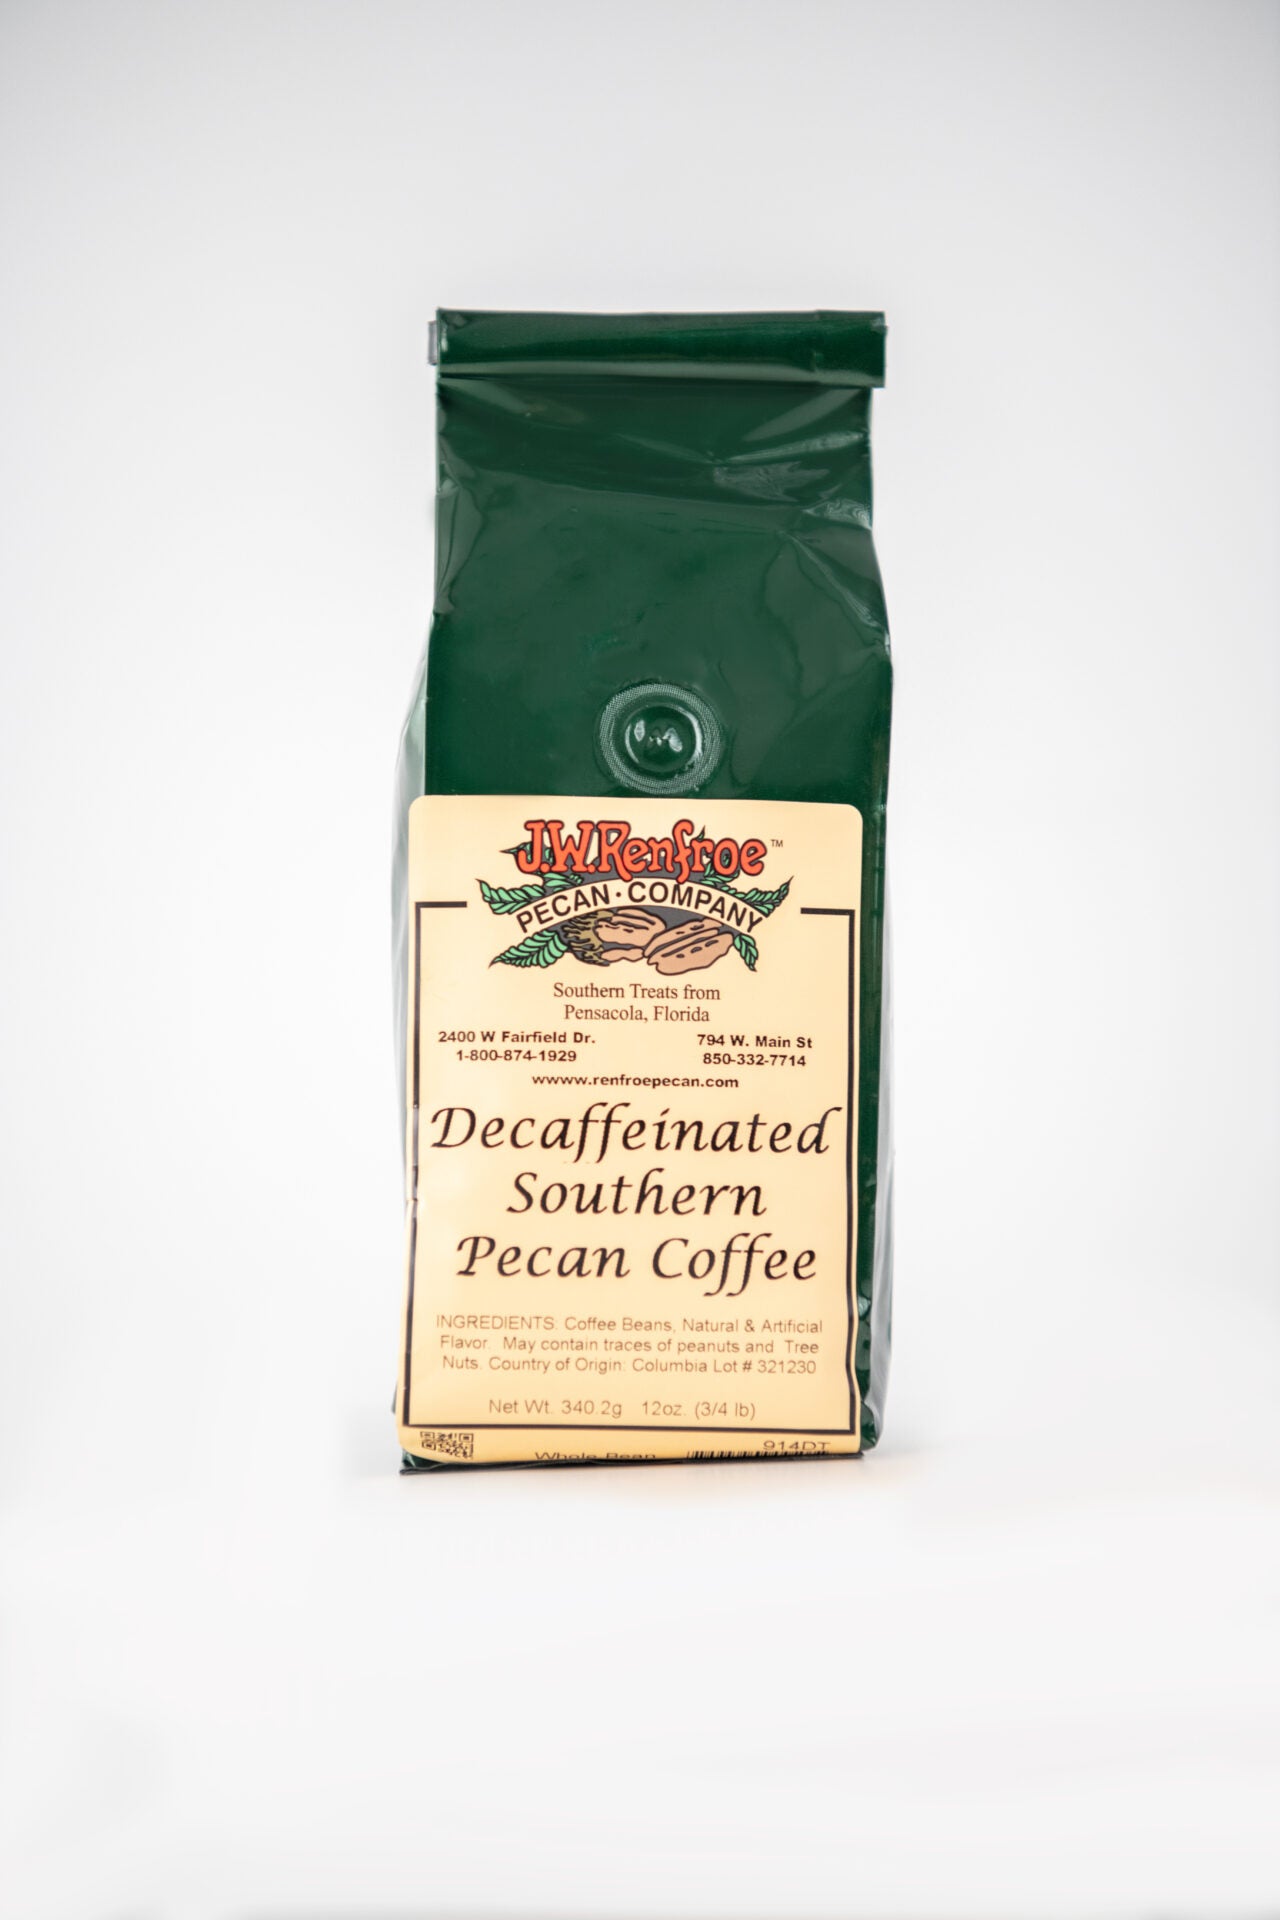 Southern Pecan Coffee Decaf